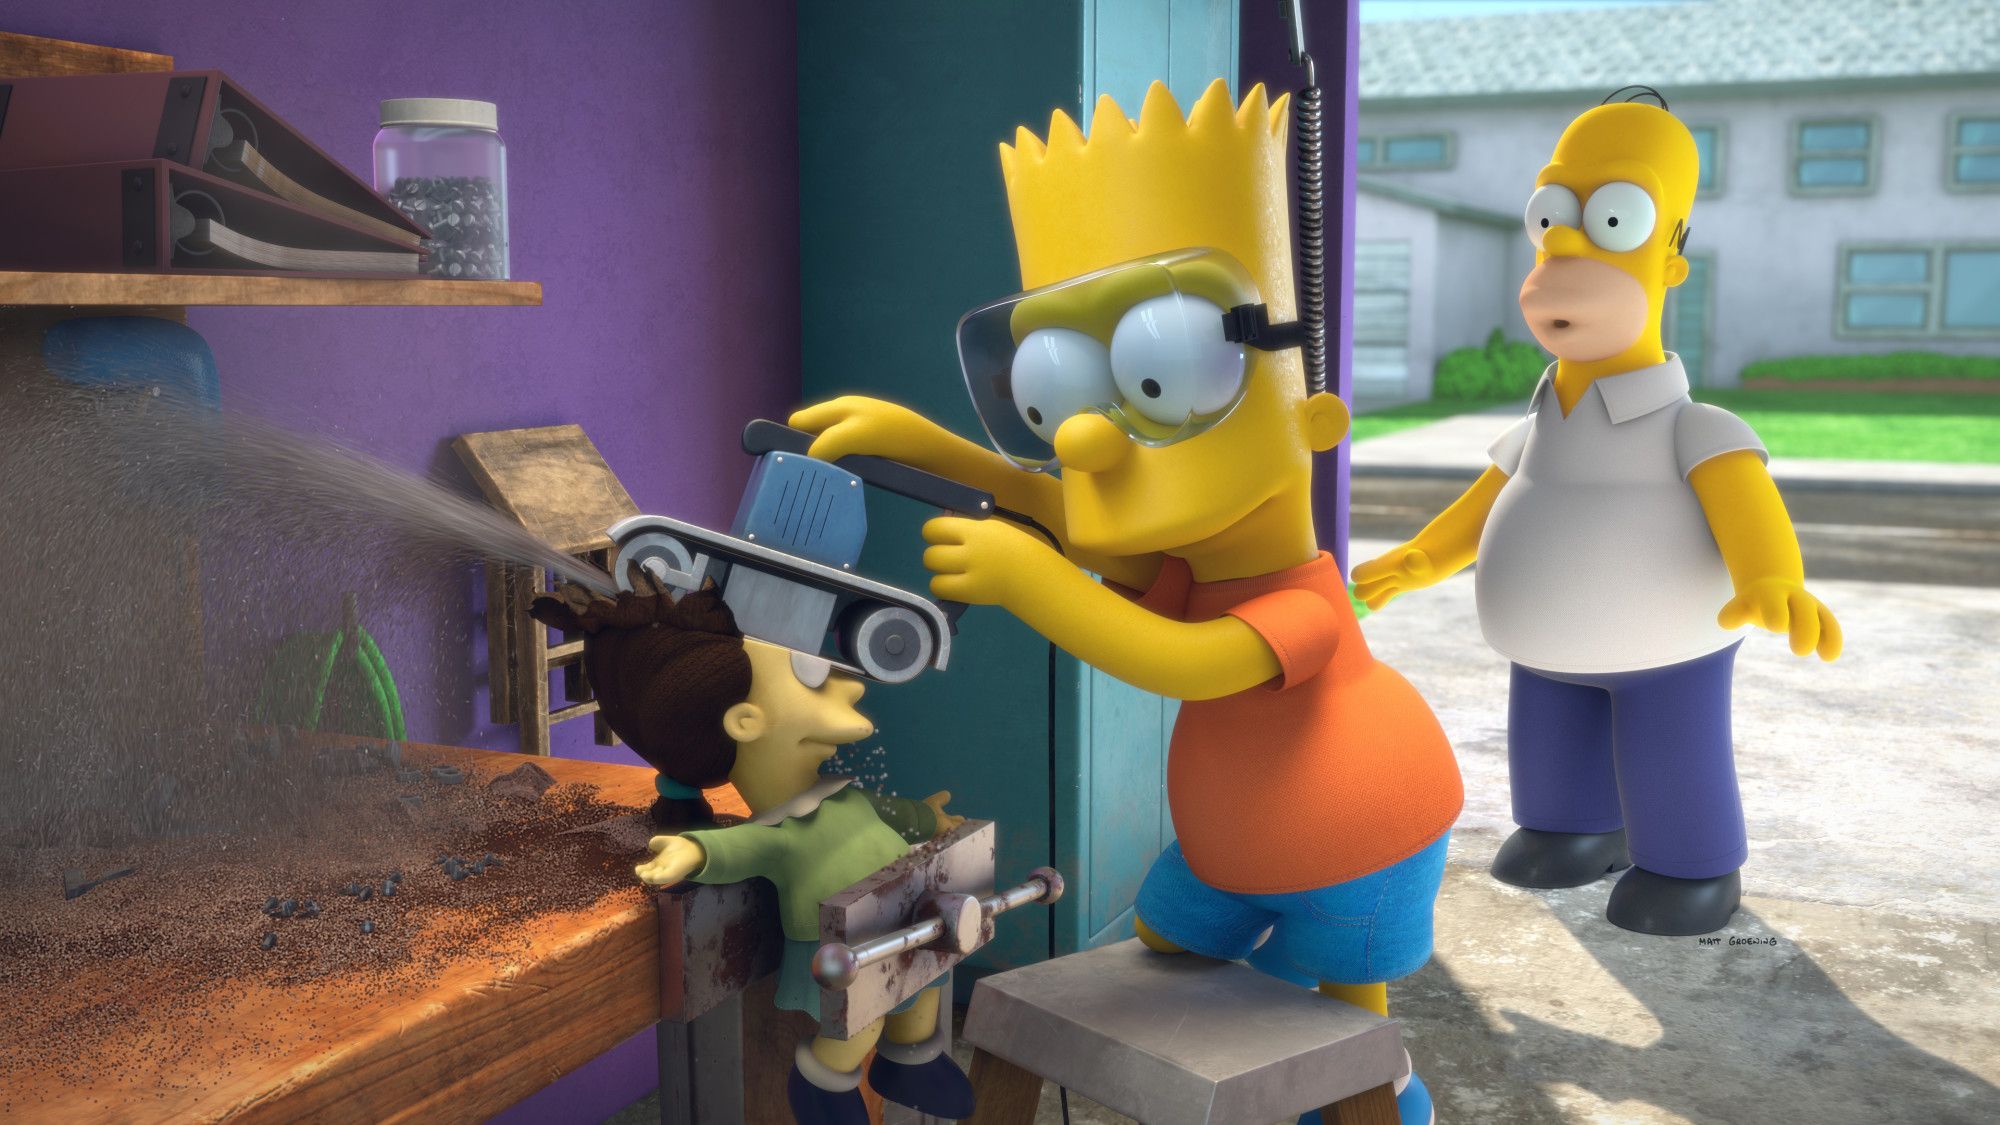 Simpsons Return To CGI Animation In Treehouse of Horror XXXI Images